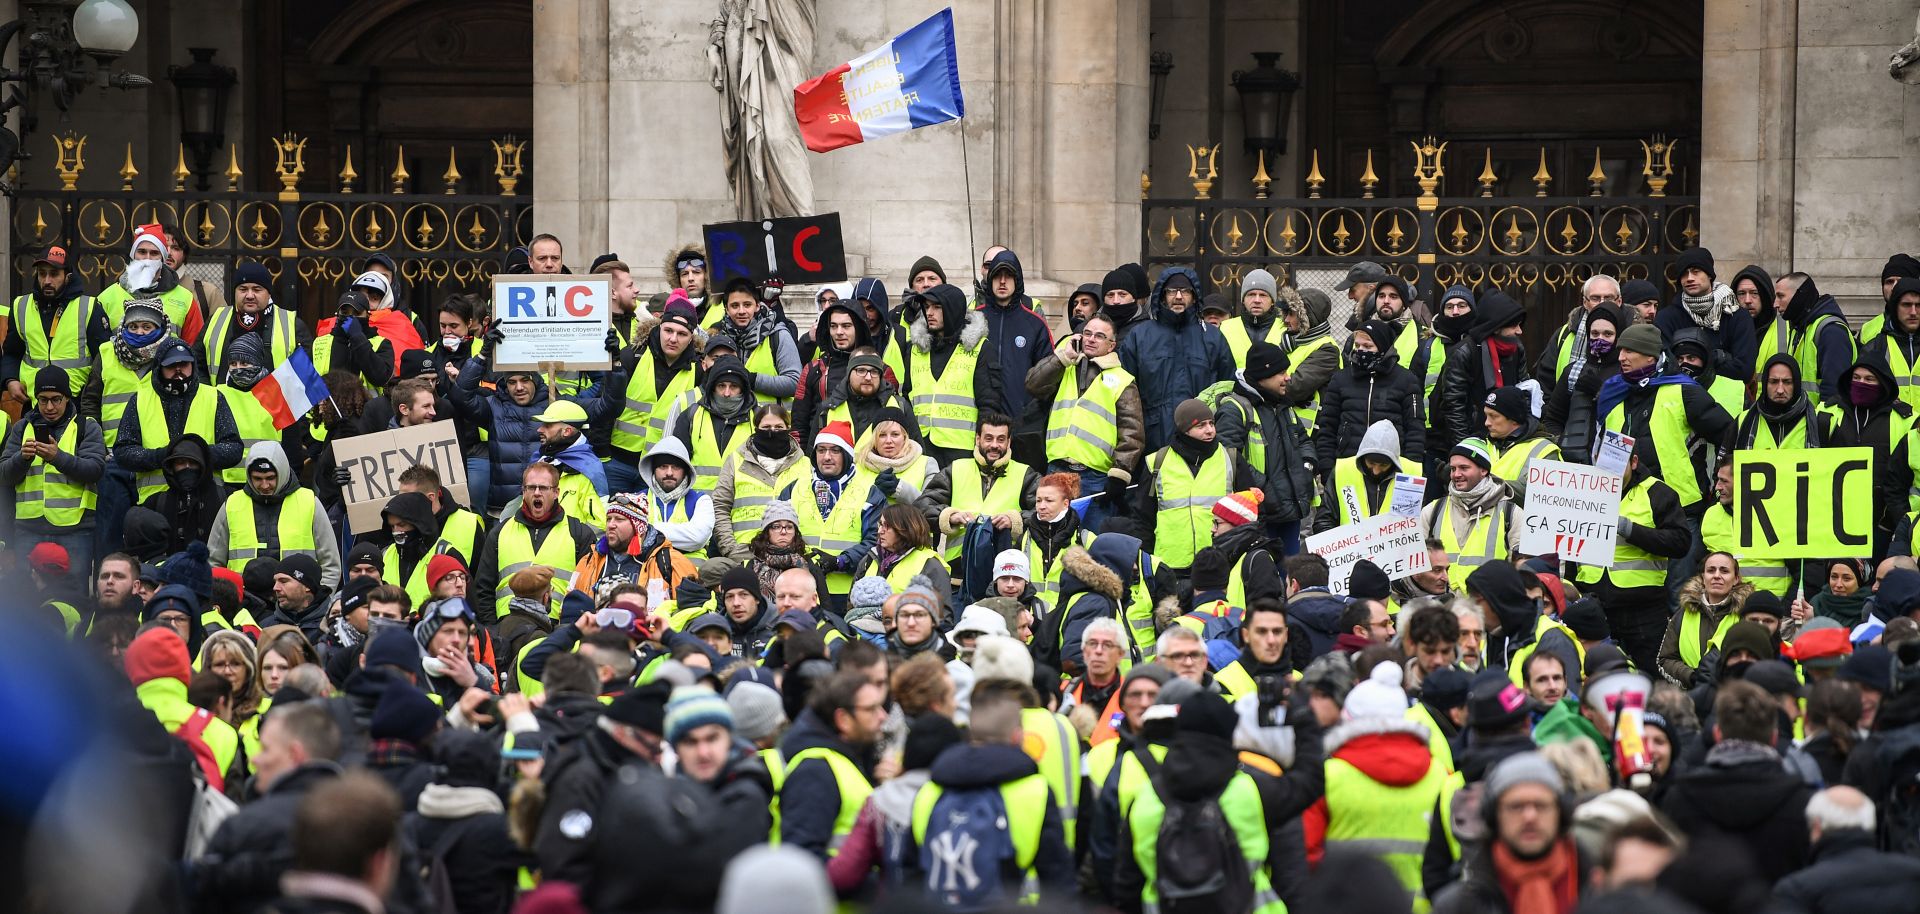 Yellow vest protesters gather at the Place de l'Opera in Paris on Dec. 15, 2018.